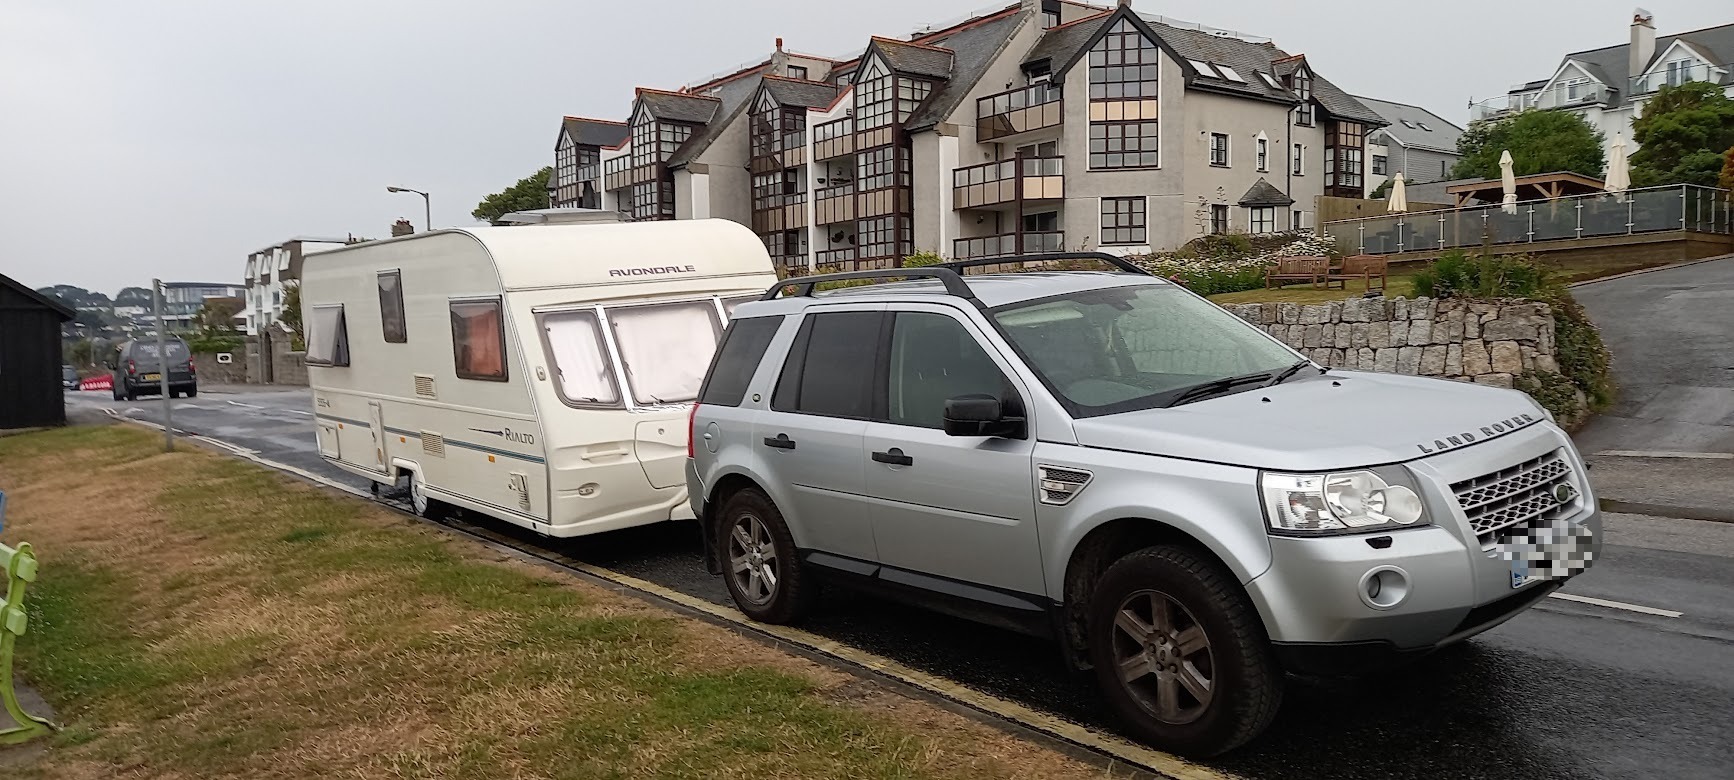 Vans parked on Falmouth sea front